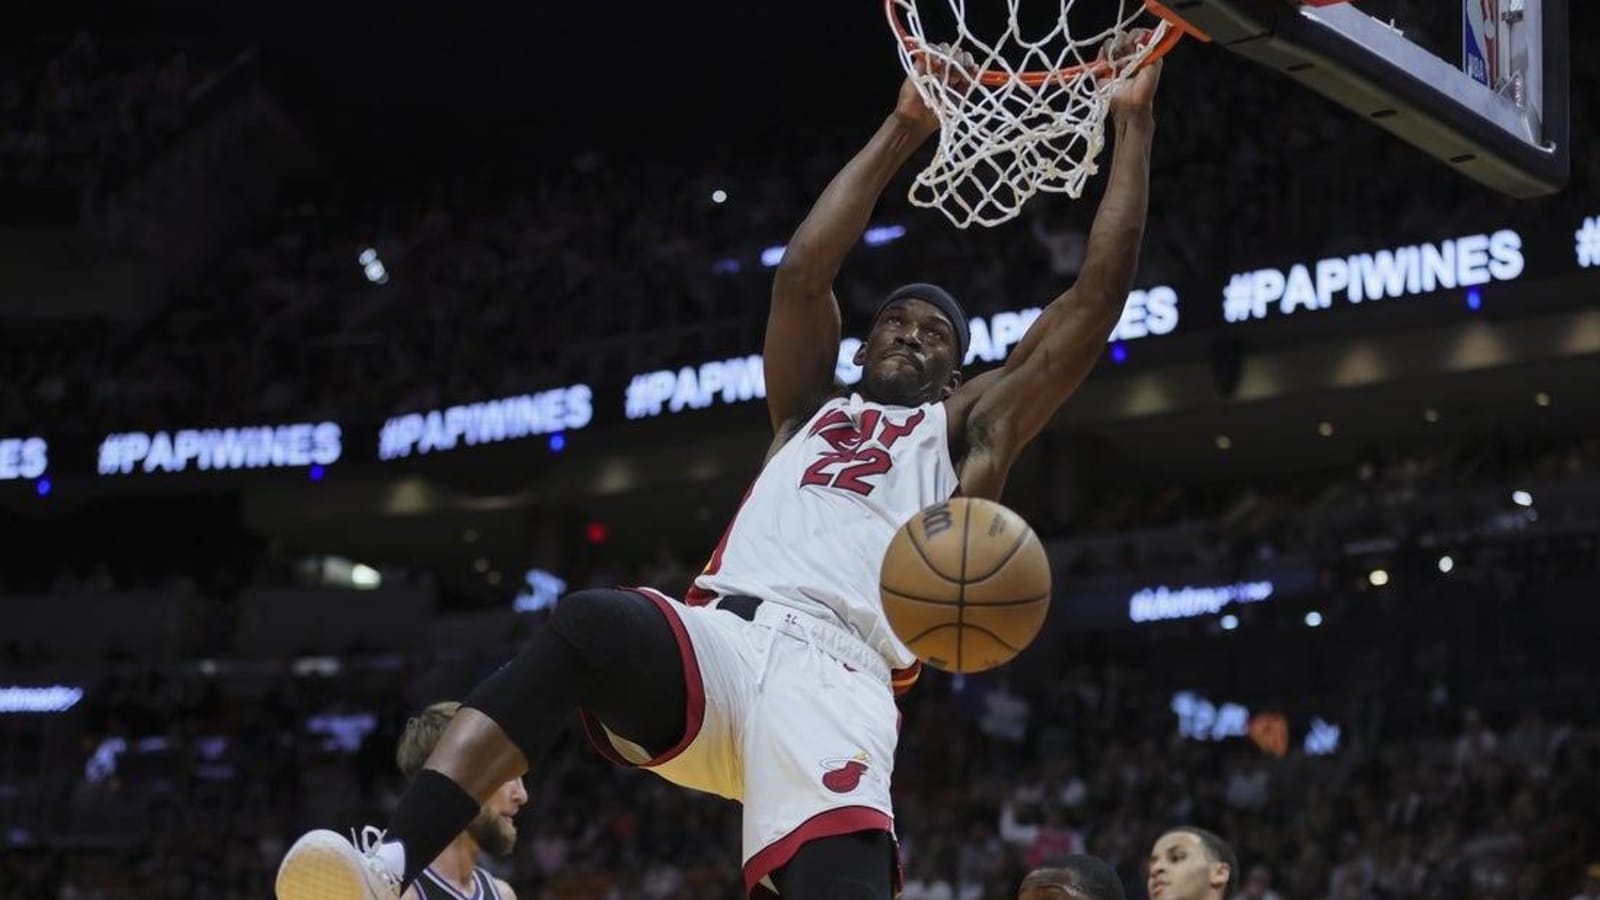 Losing skid over, Heat take on struggling Wizards